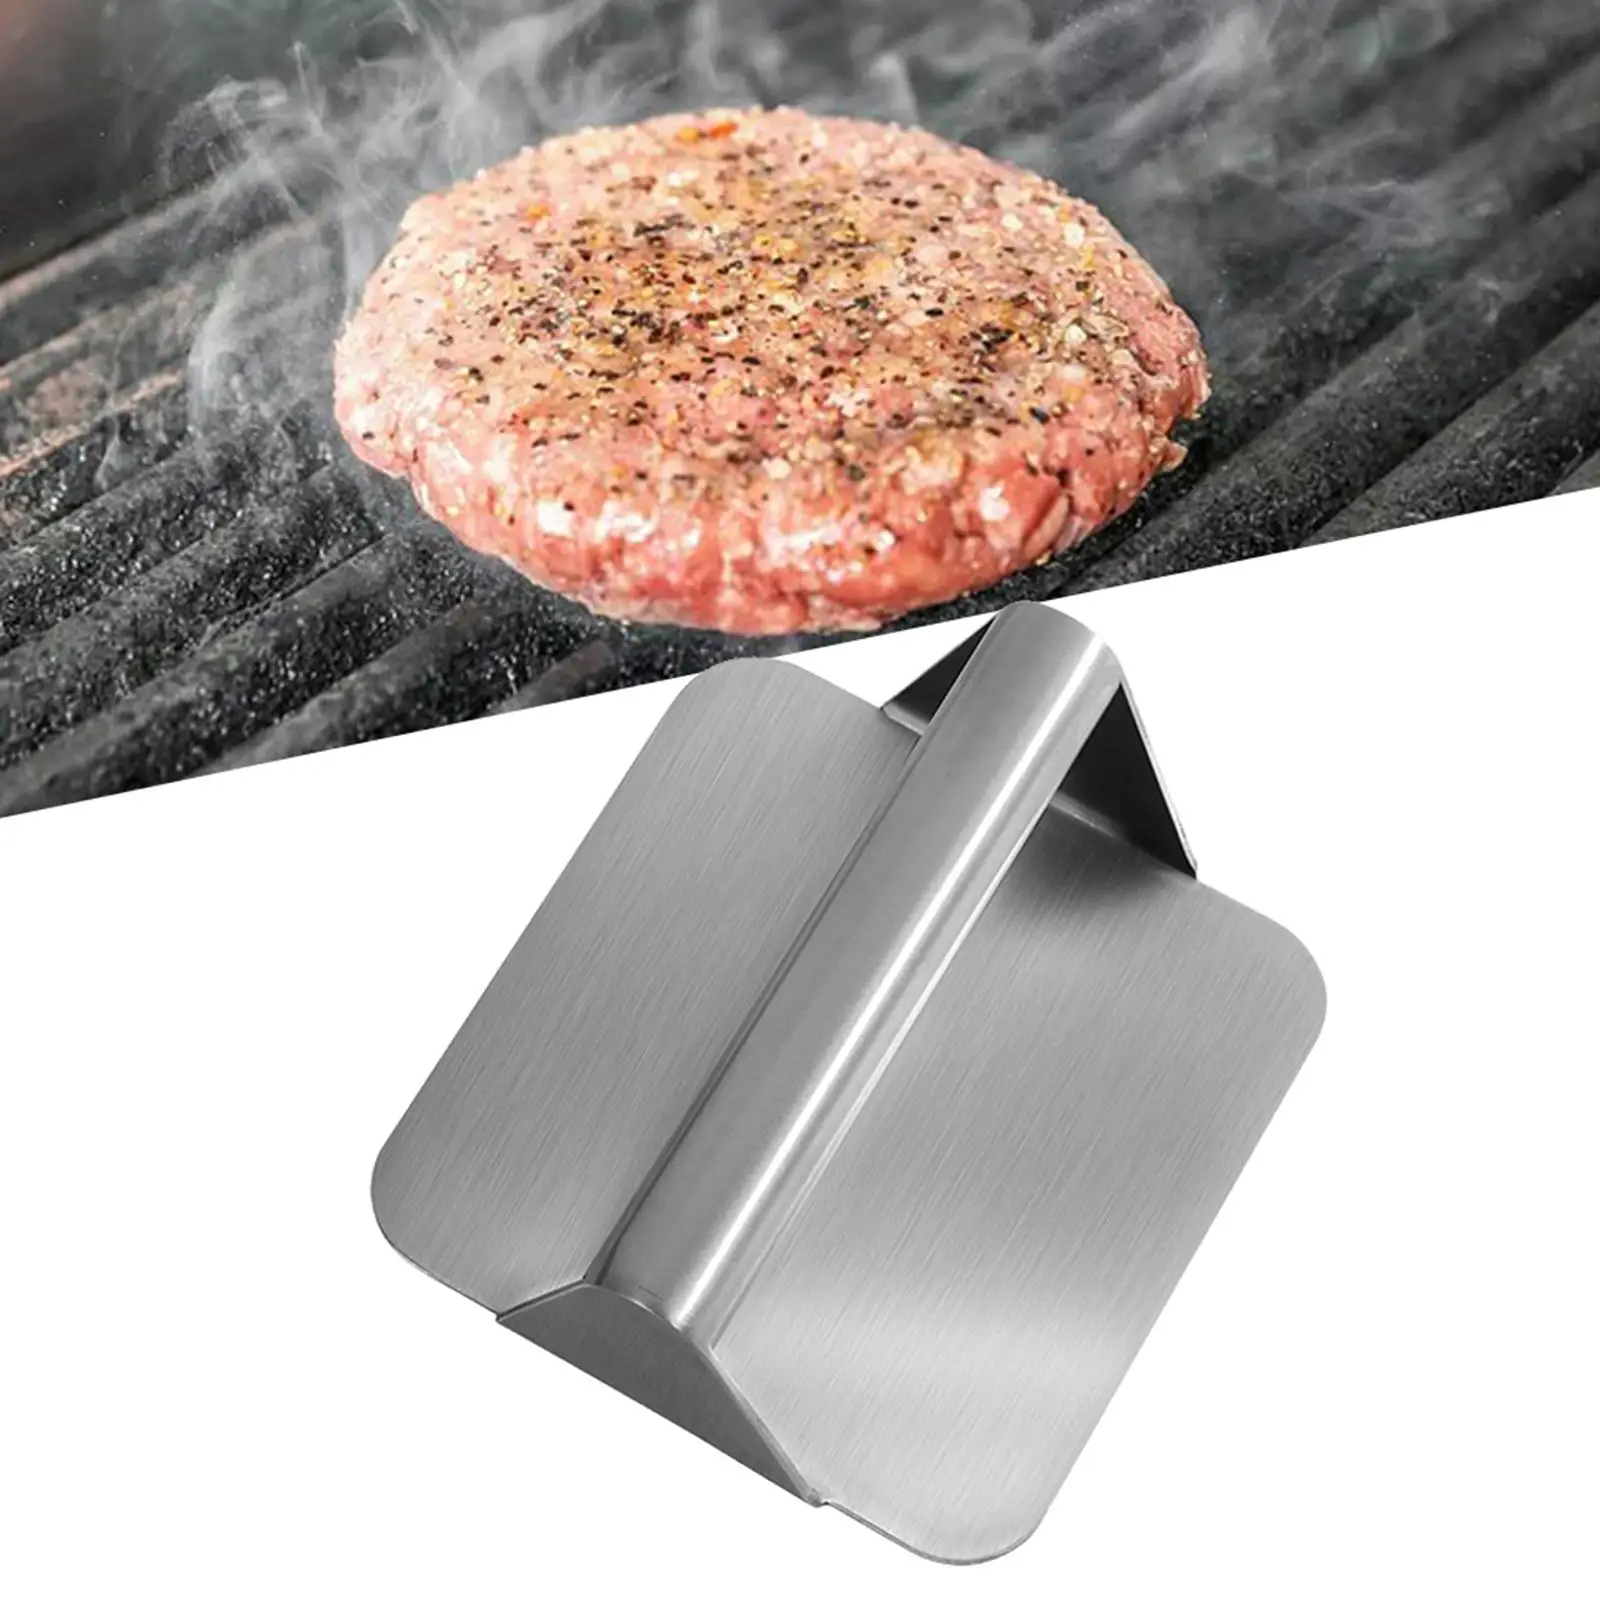 Manual 304 Stainless Steel Burger Press for Griddle Non Stick Patty Maker